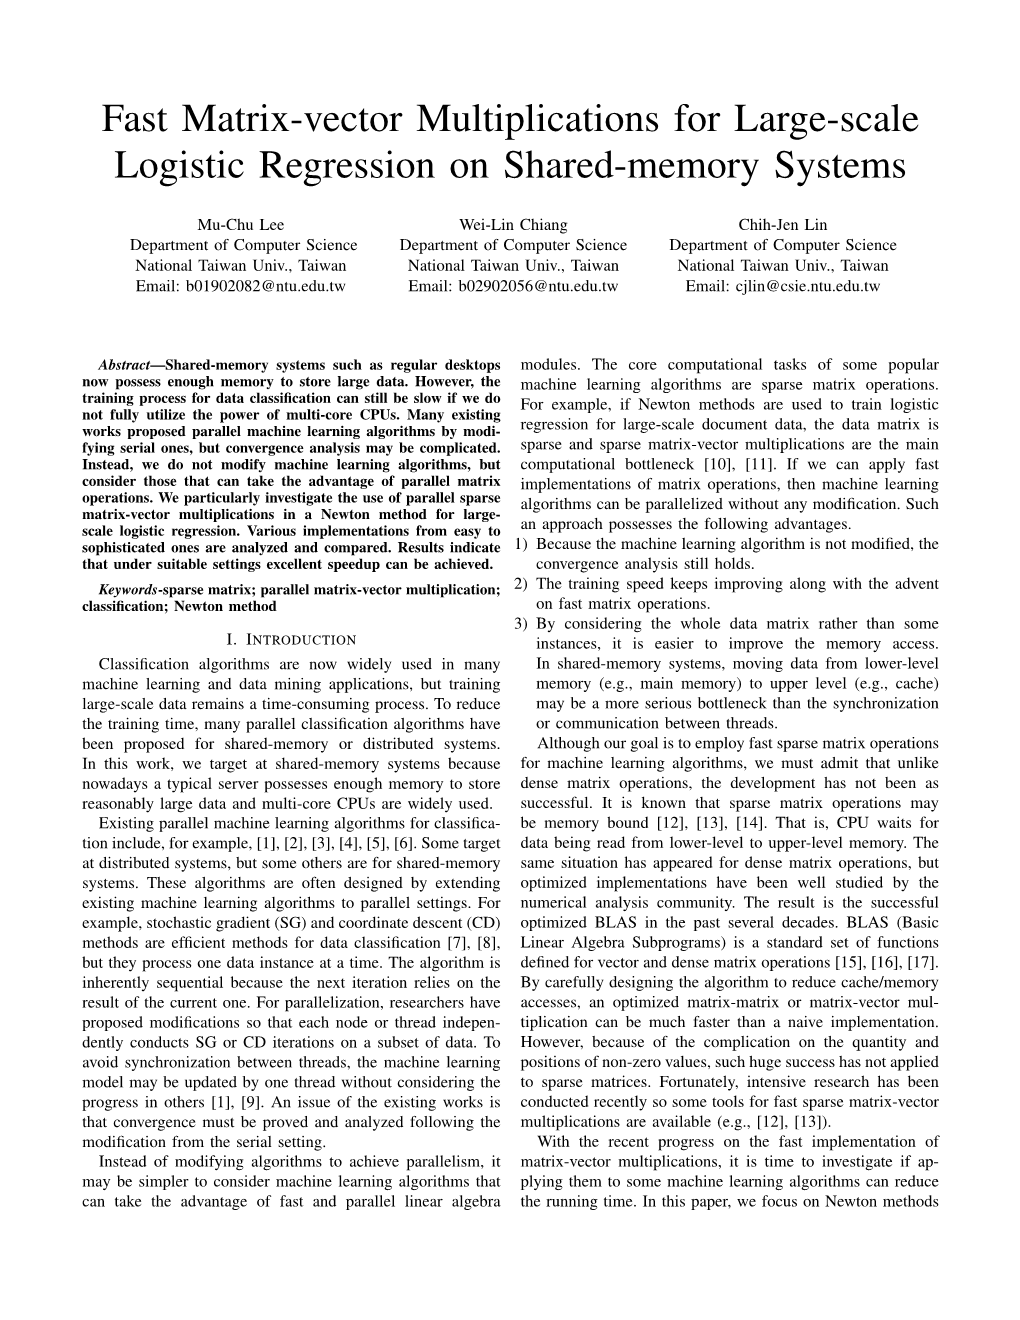 Fast Matrix-Vector Multiplications for Large-Scale Logistic Regression on Shared-Memory Systems